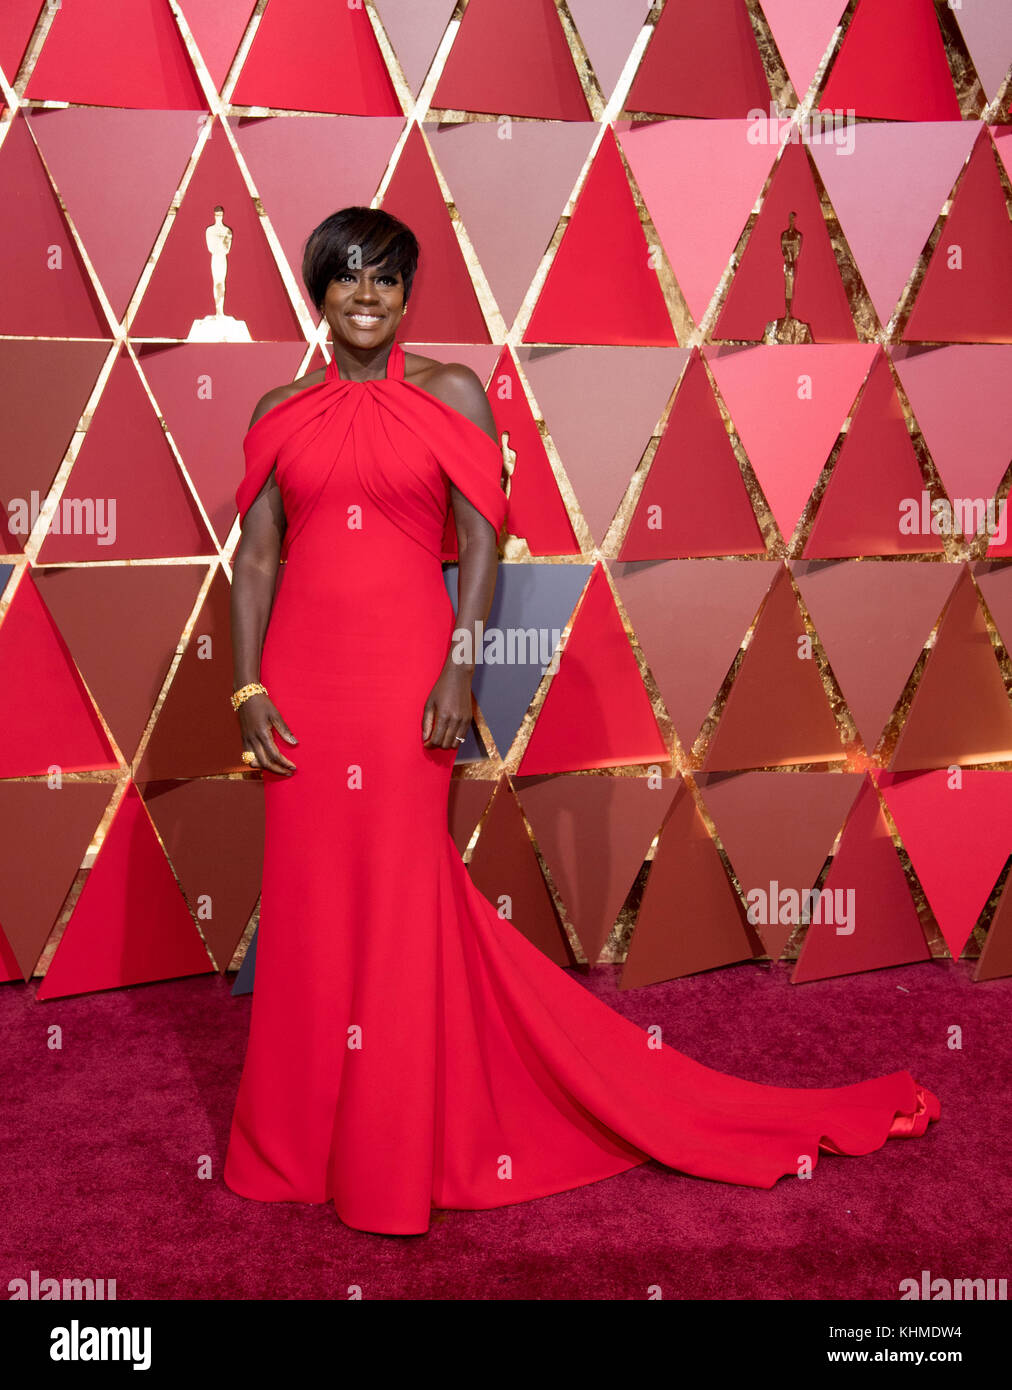 HOLLYWOOD, CA - FEBRUARY 26: Viola Davis attends the 89th Annual Academy Awards at Hollywood & Highland Center on February 26, 2017 in Hollywood, California  People:  Viola Davis  Transmission Ref:  MNC Stock Photo